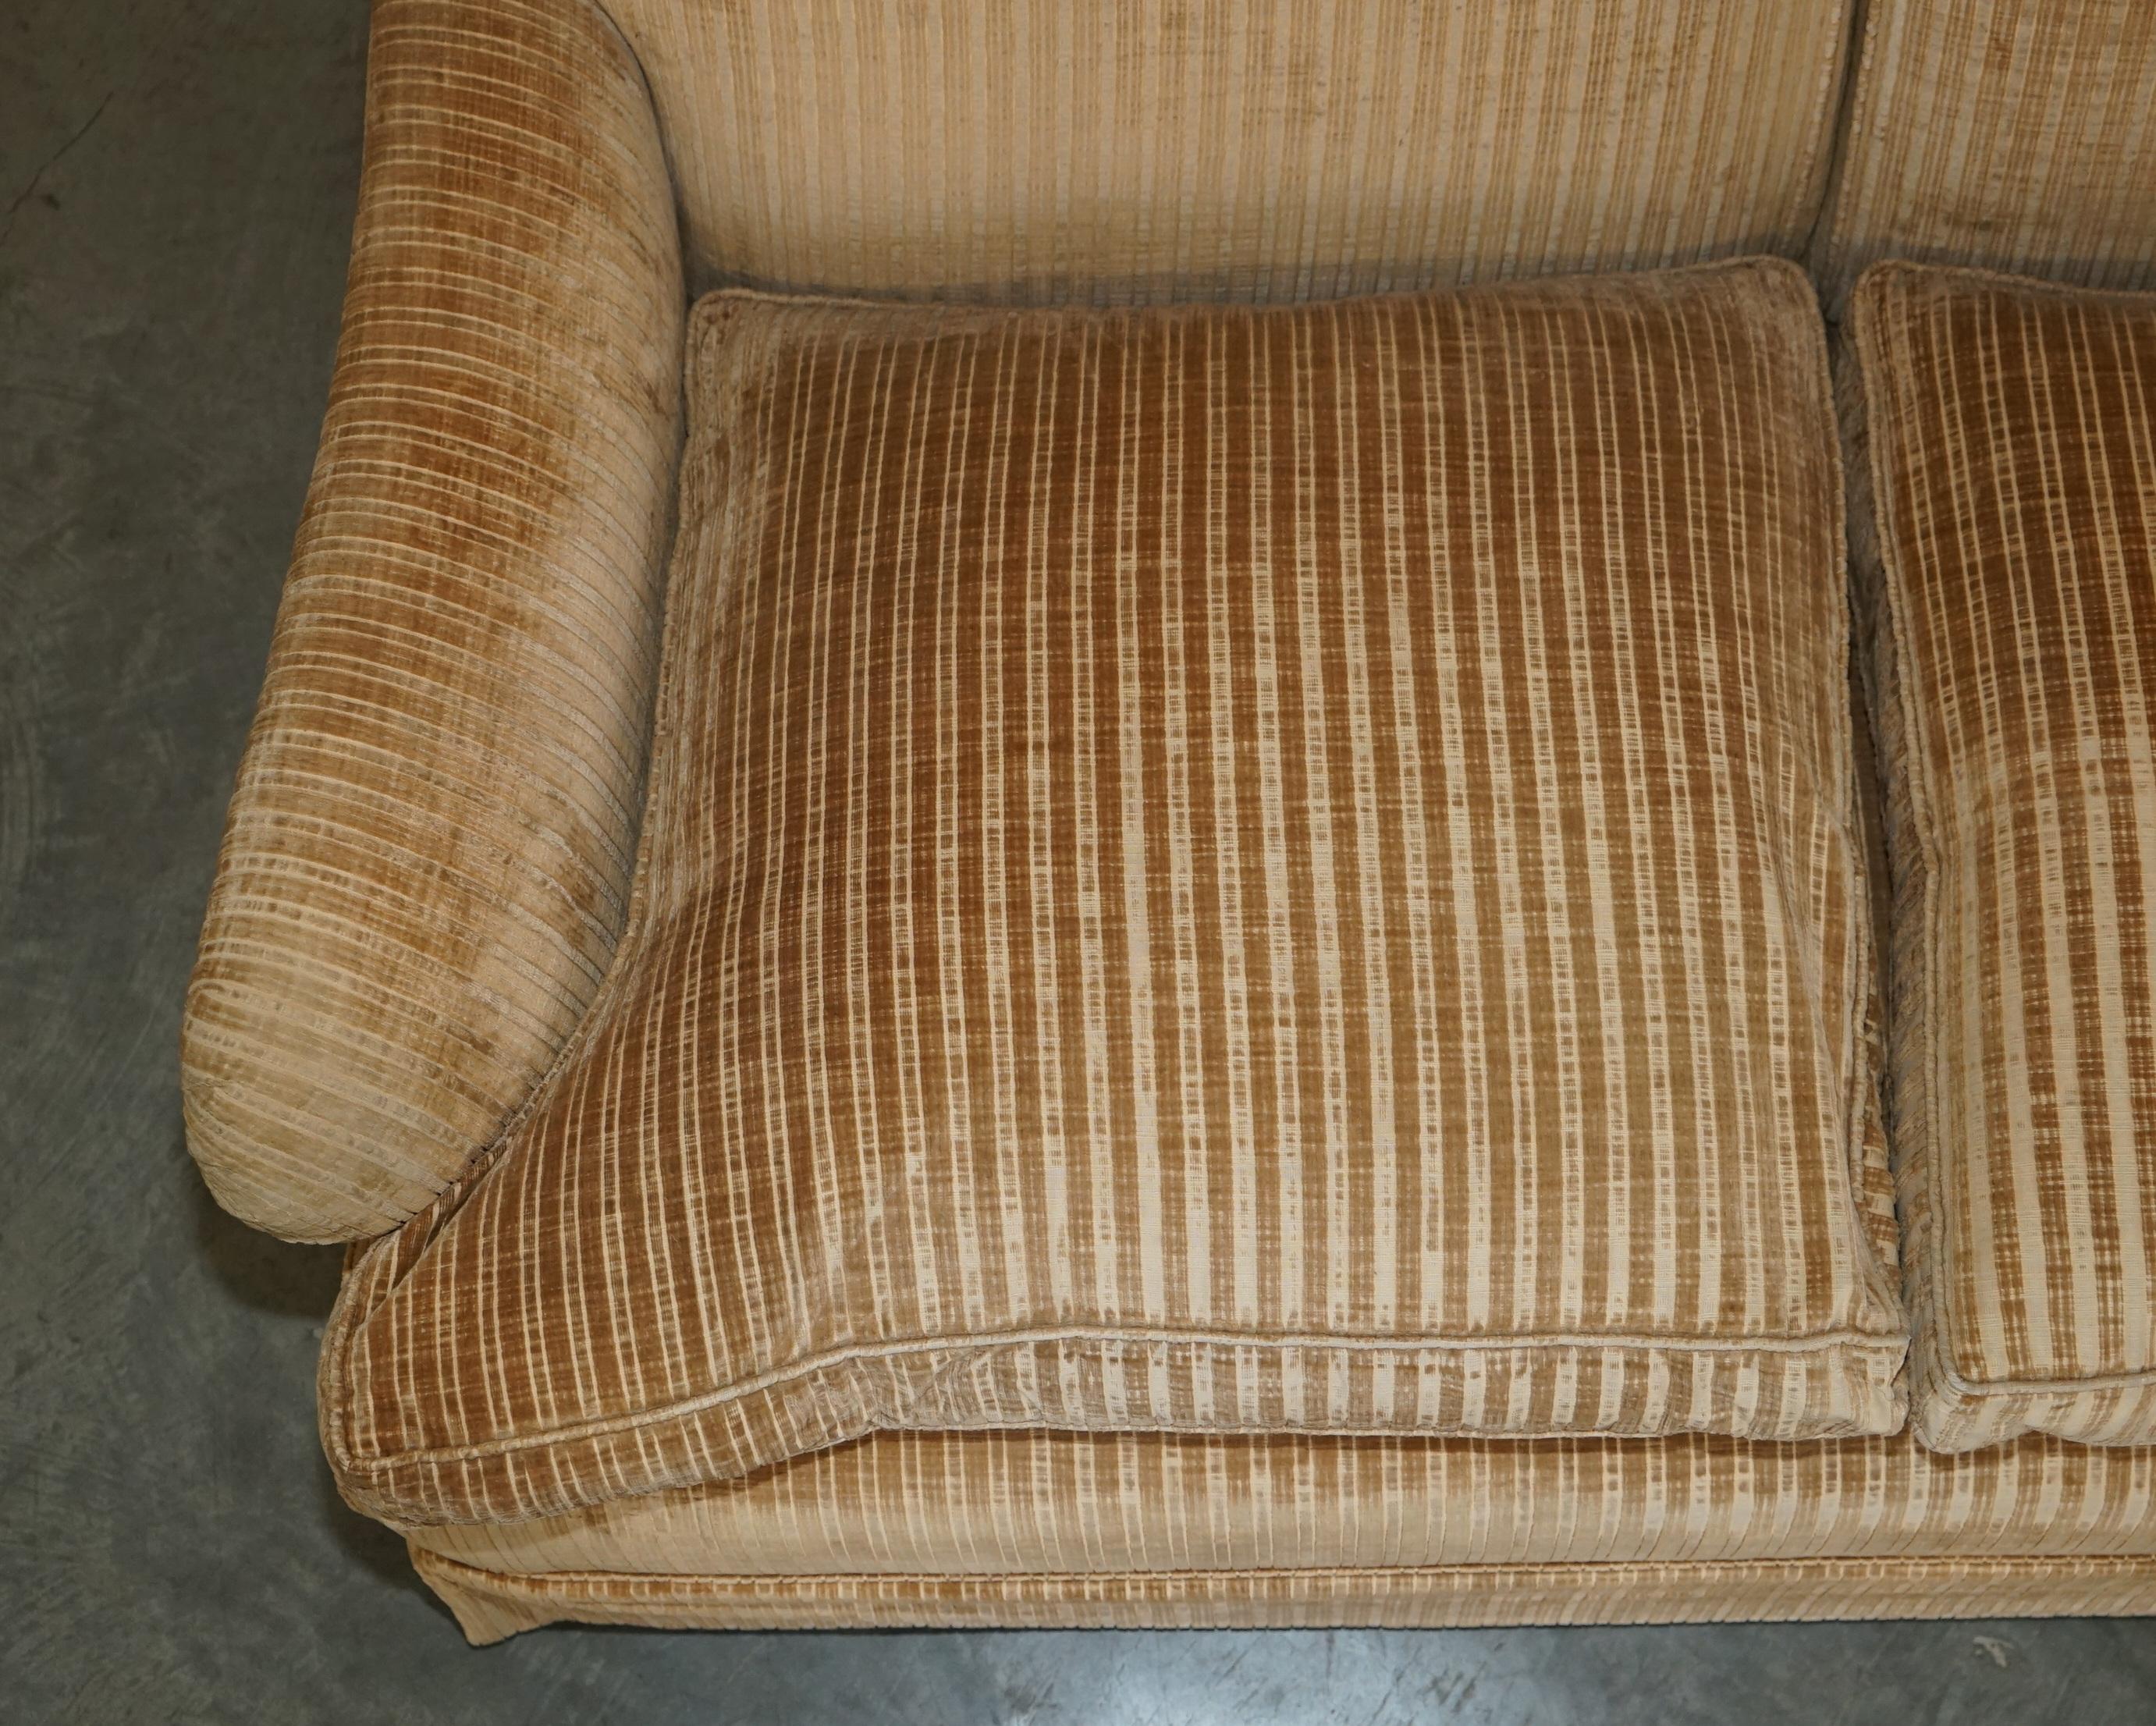 20th Century LOVELY HOWARD & SON'S / CHAIRS LTD TWO SEAT SOFA FEATHER FILLED SEAT CUSHIONs For Sale